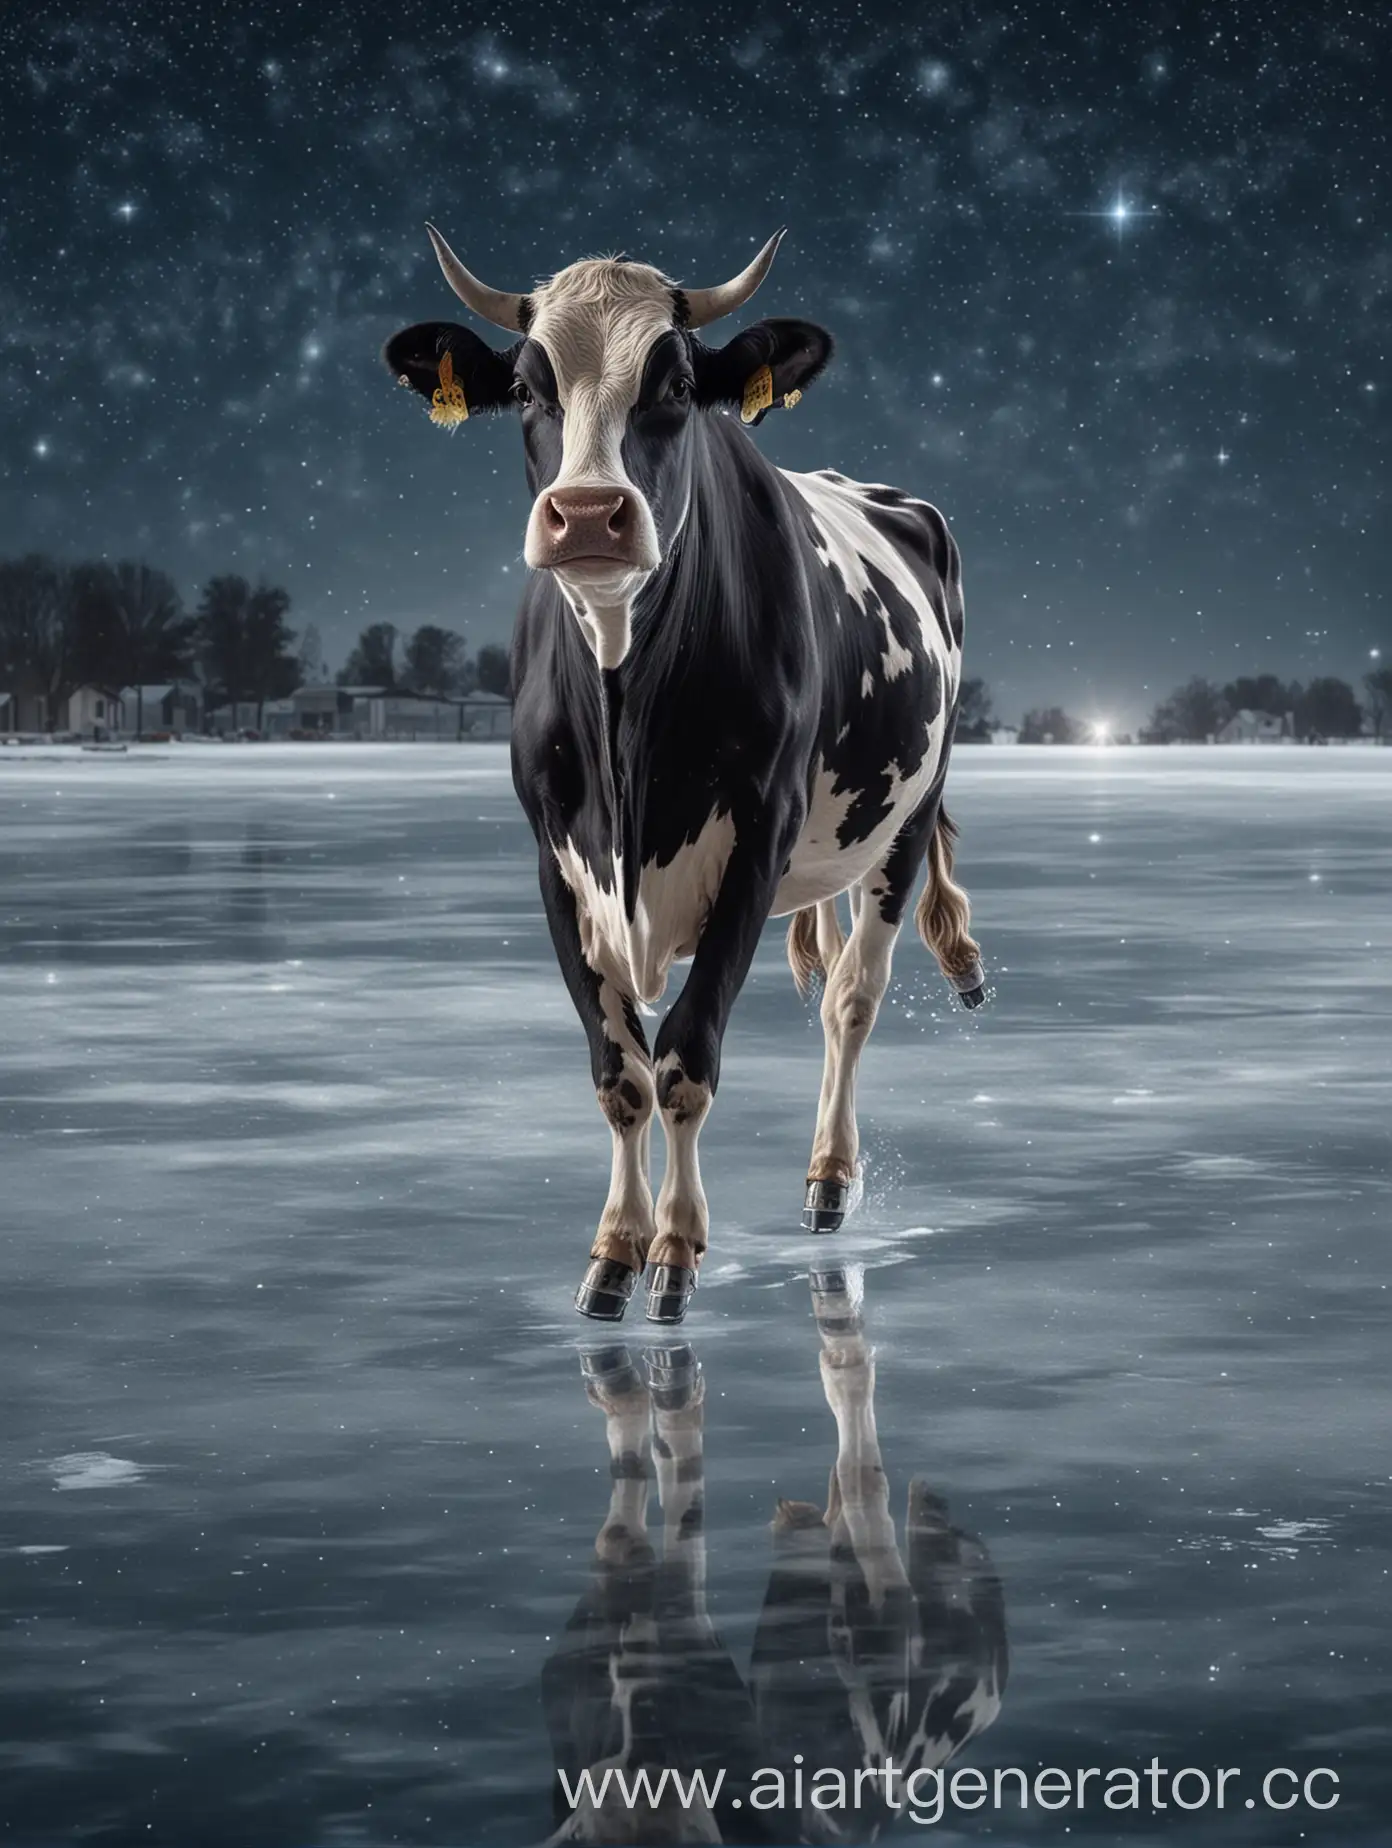 Graceful-Cow-Skating-on-Ice-Under-Starry-Sky-to-Classical-Music